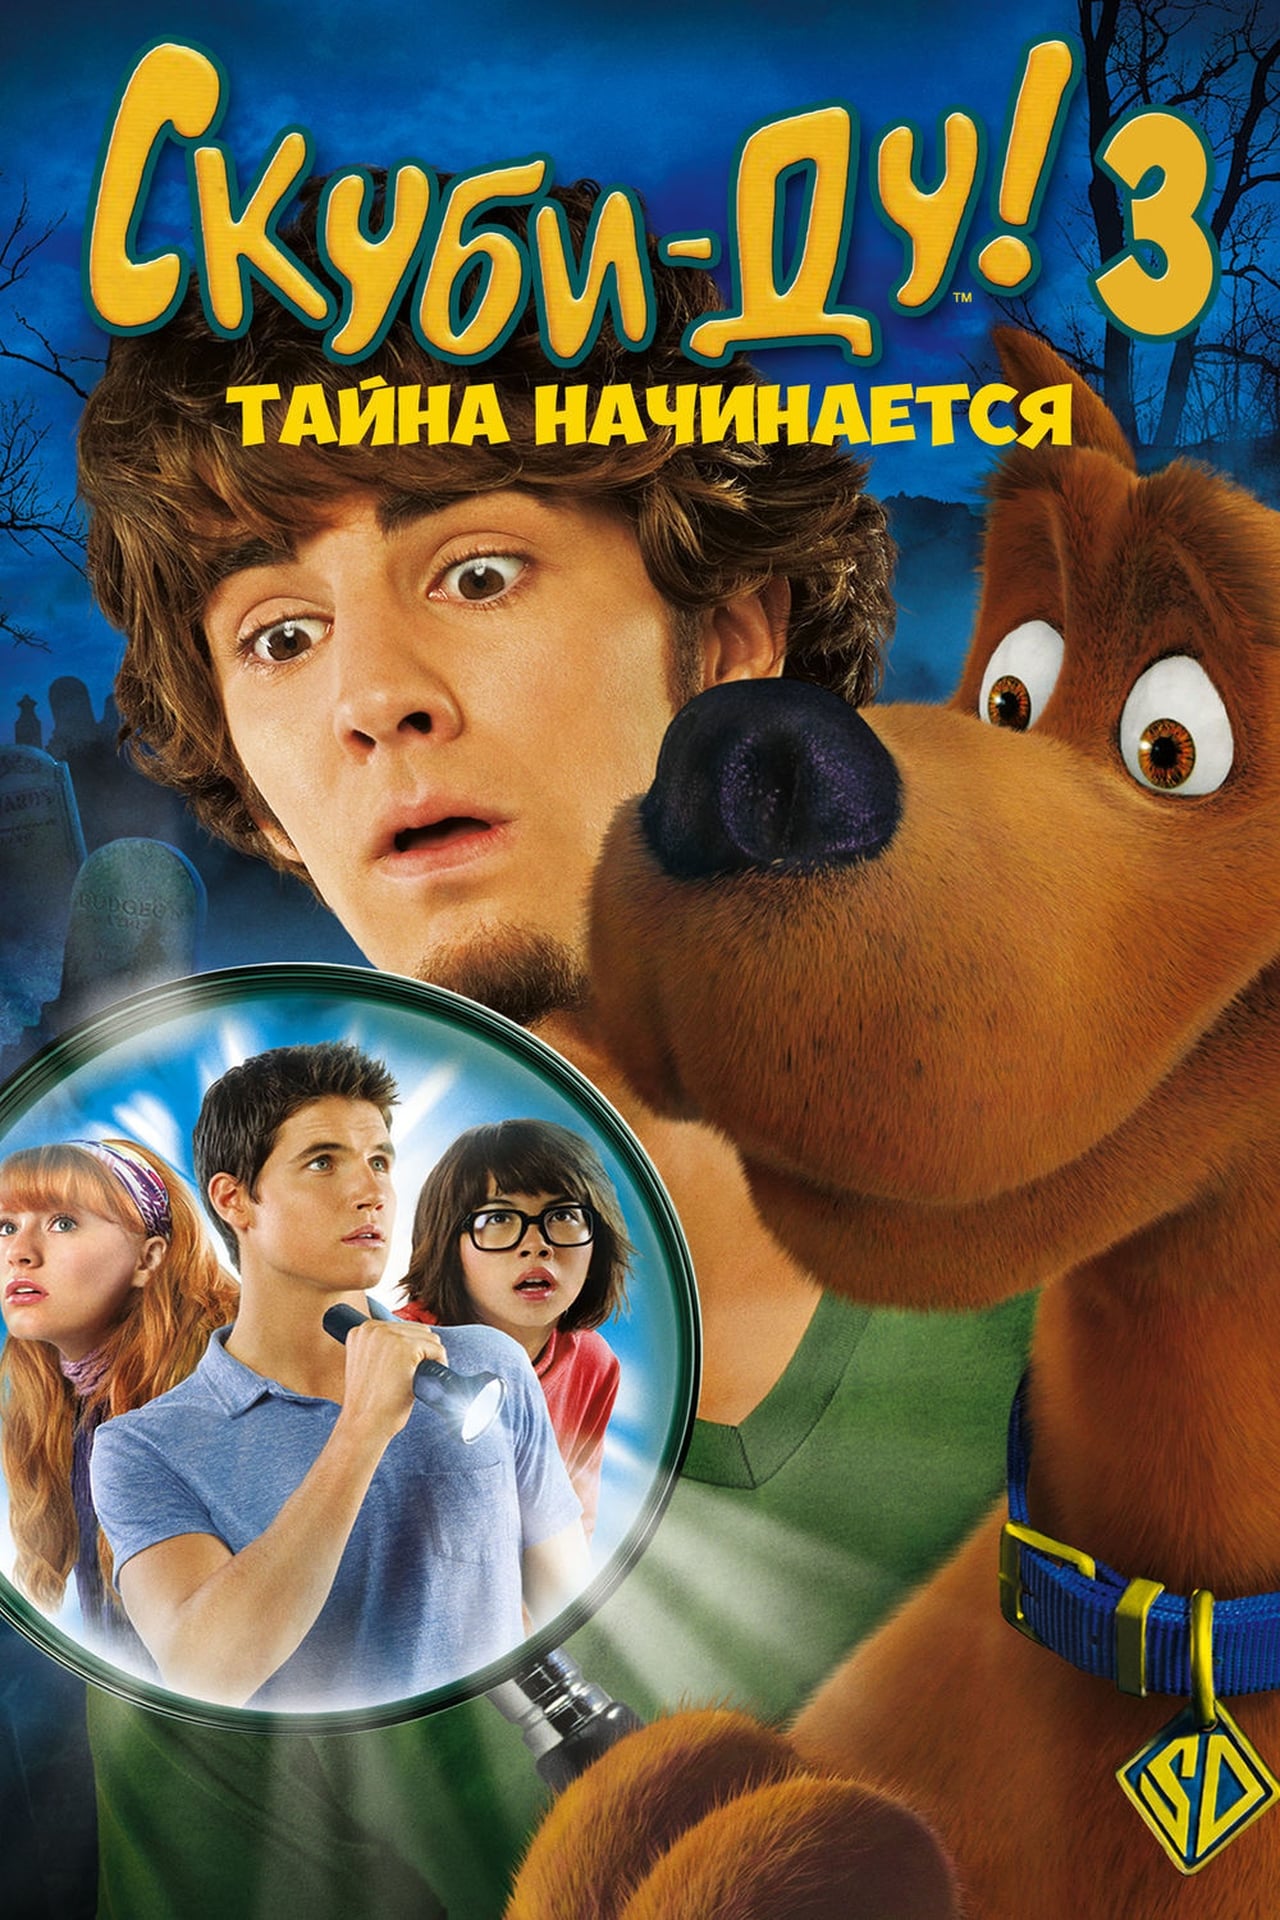 Scooby-Doo! The Mystery Begins wiki, synopsis, reviews, watch and download